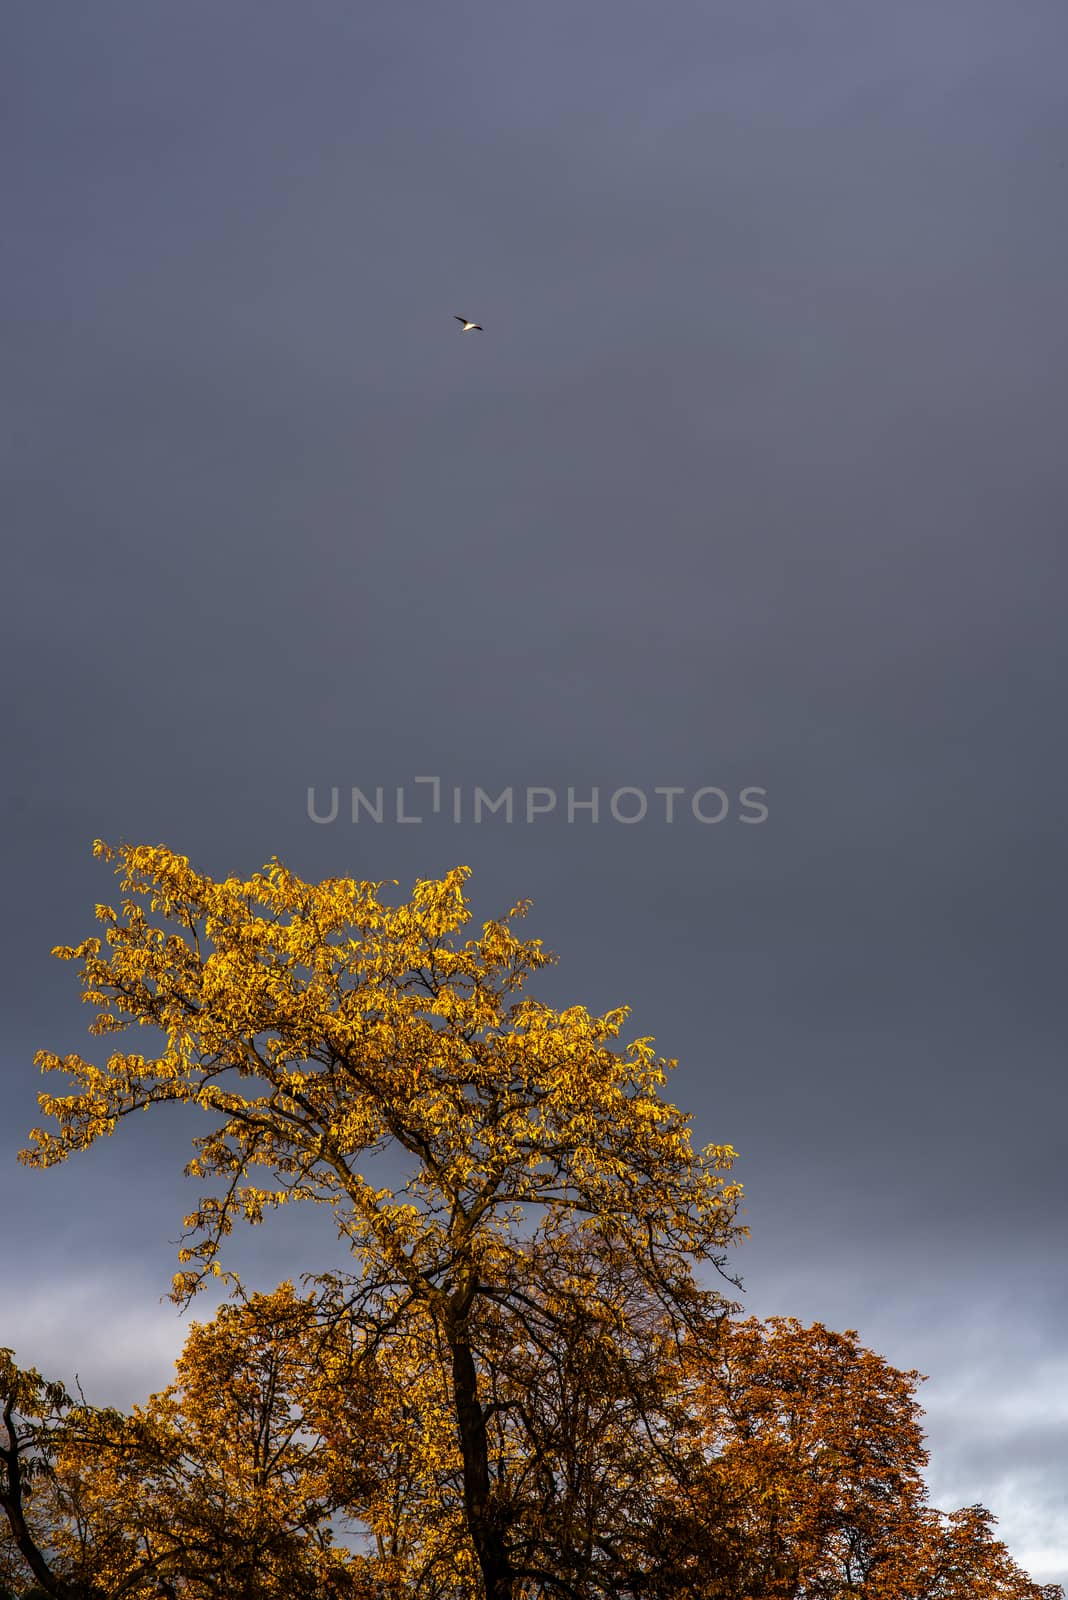 Yellow treetop and a bird with a storm sky by gonzalobell